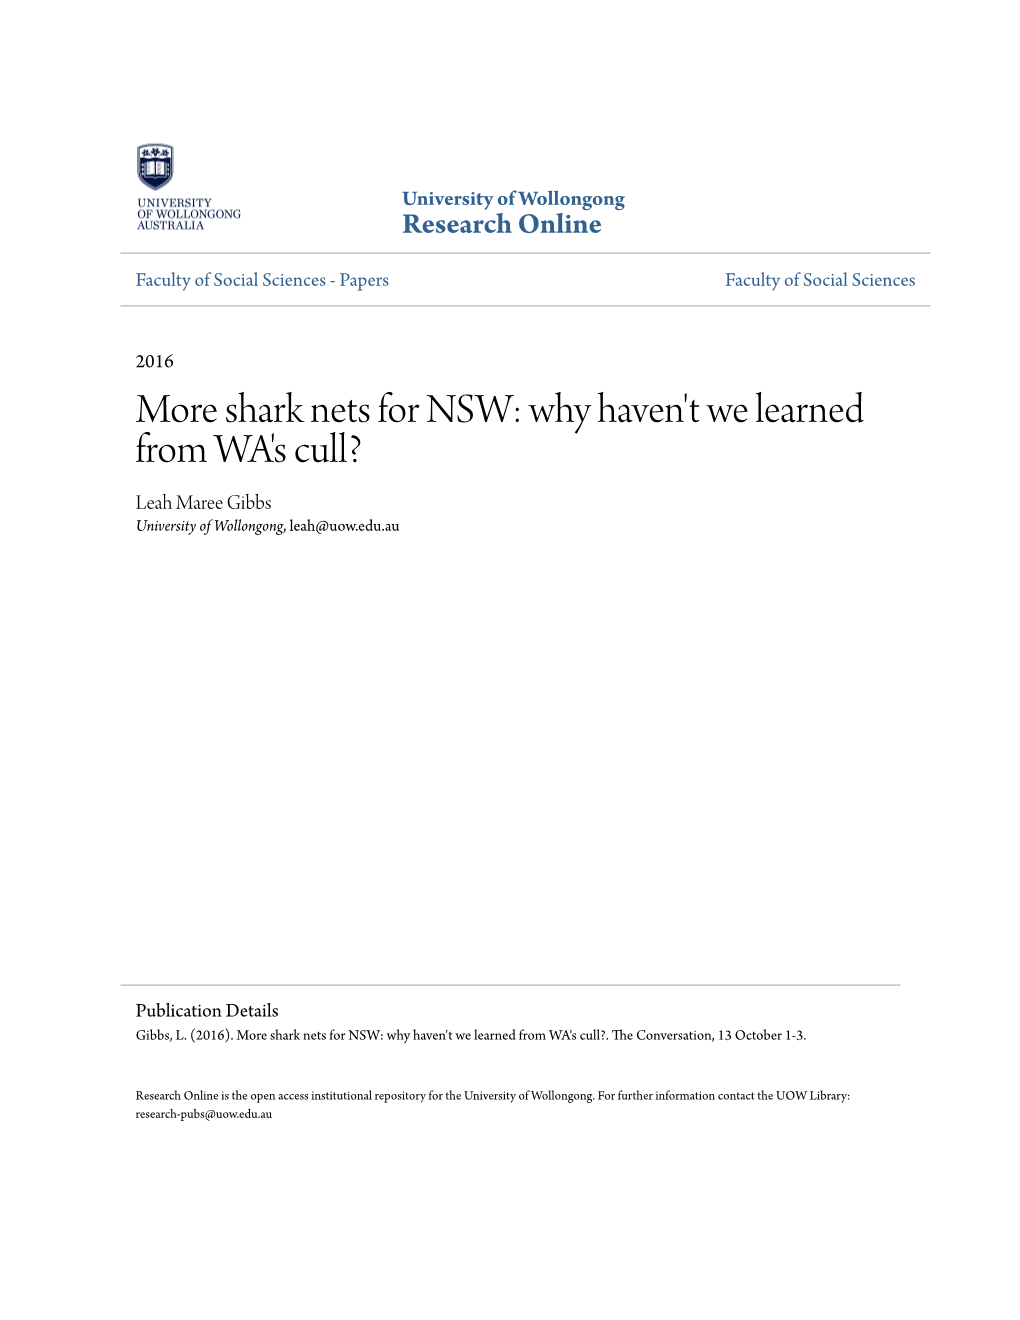 Shark Nets for NSW: Why Haven't We Learned from WA's Cull? Leah Maree Gibbs University of Wollongong, Leah@Uow.Edu.Au